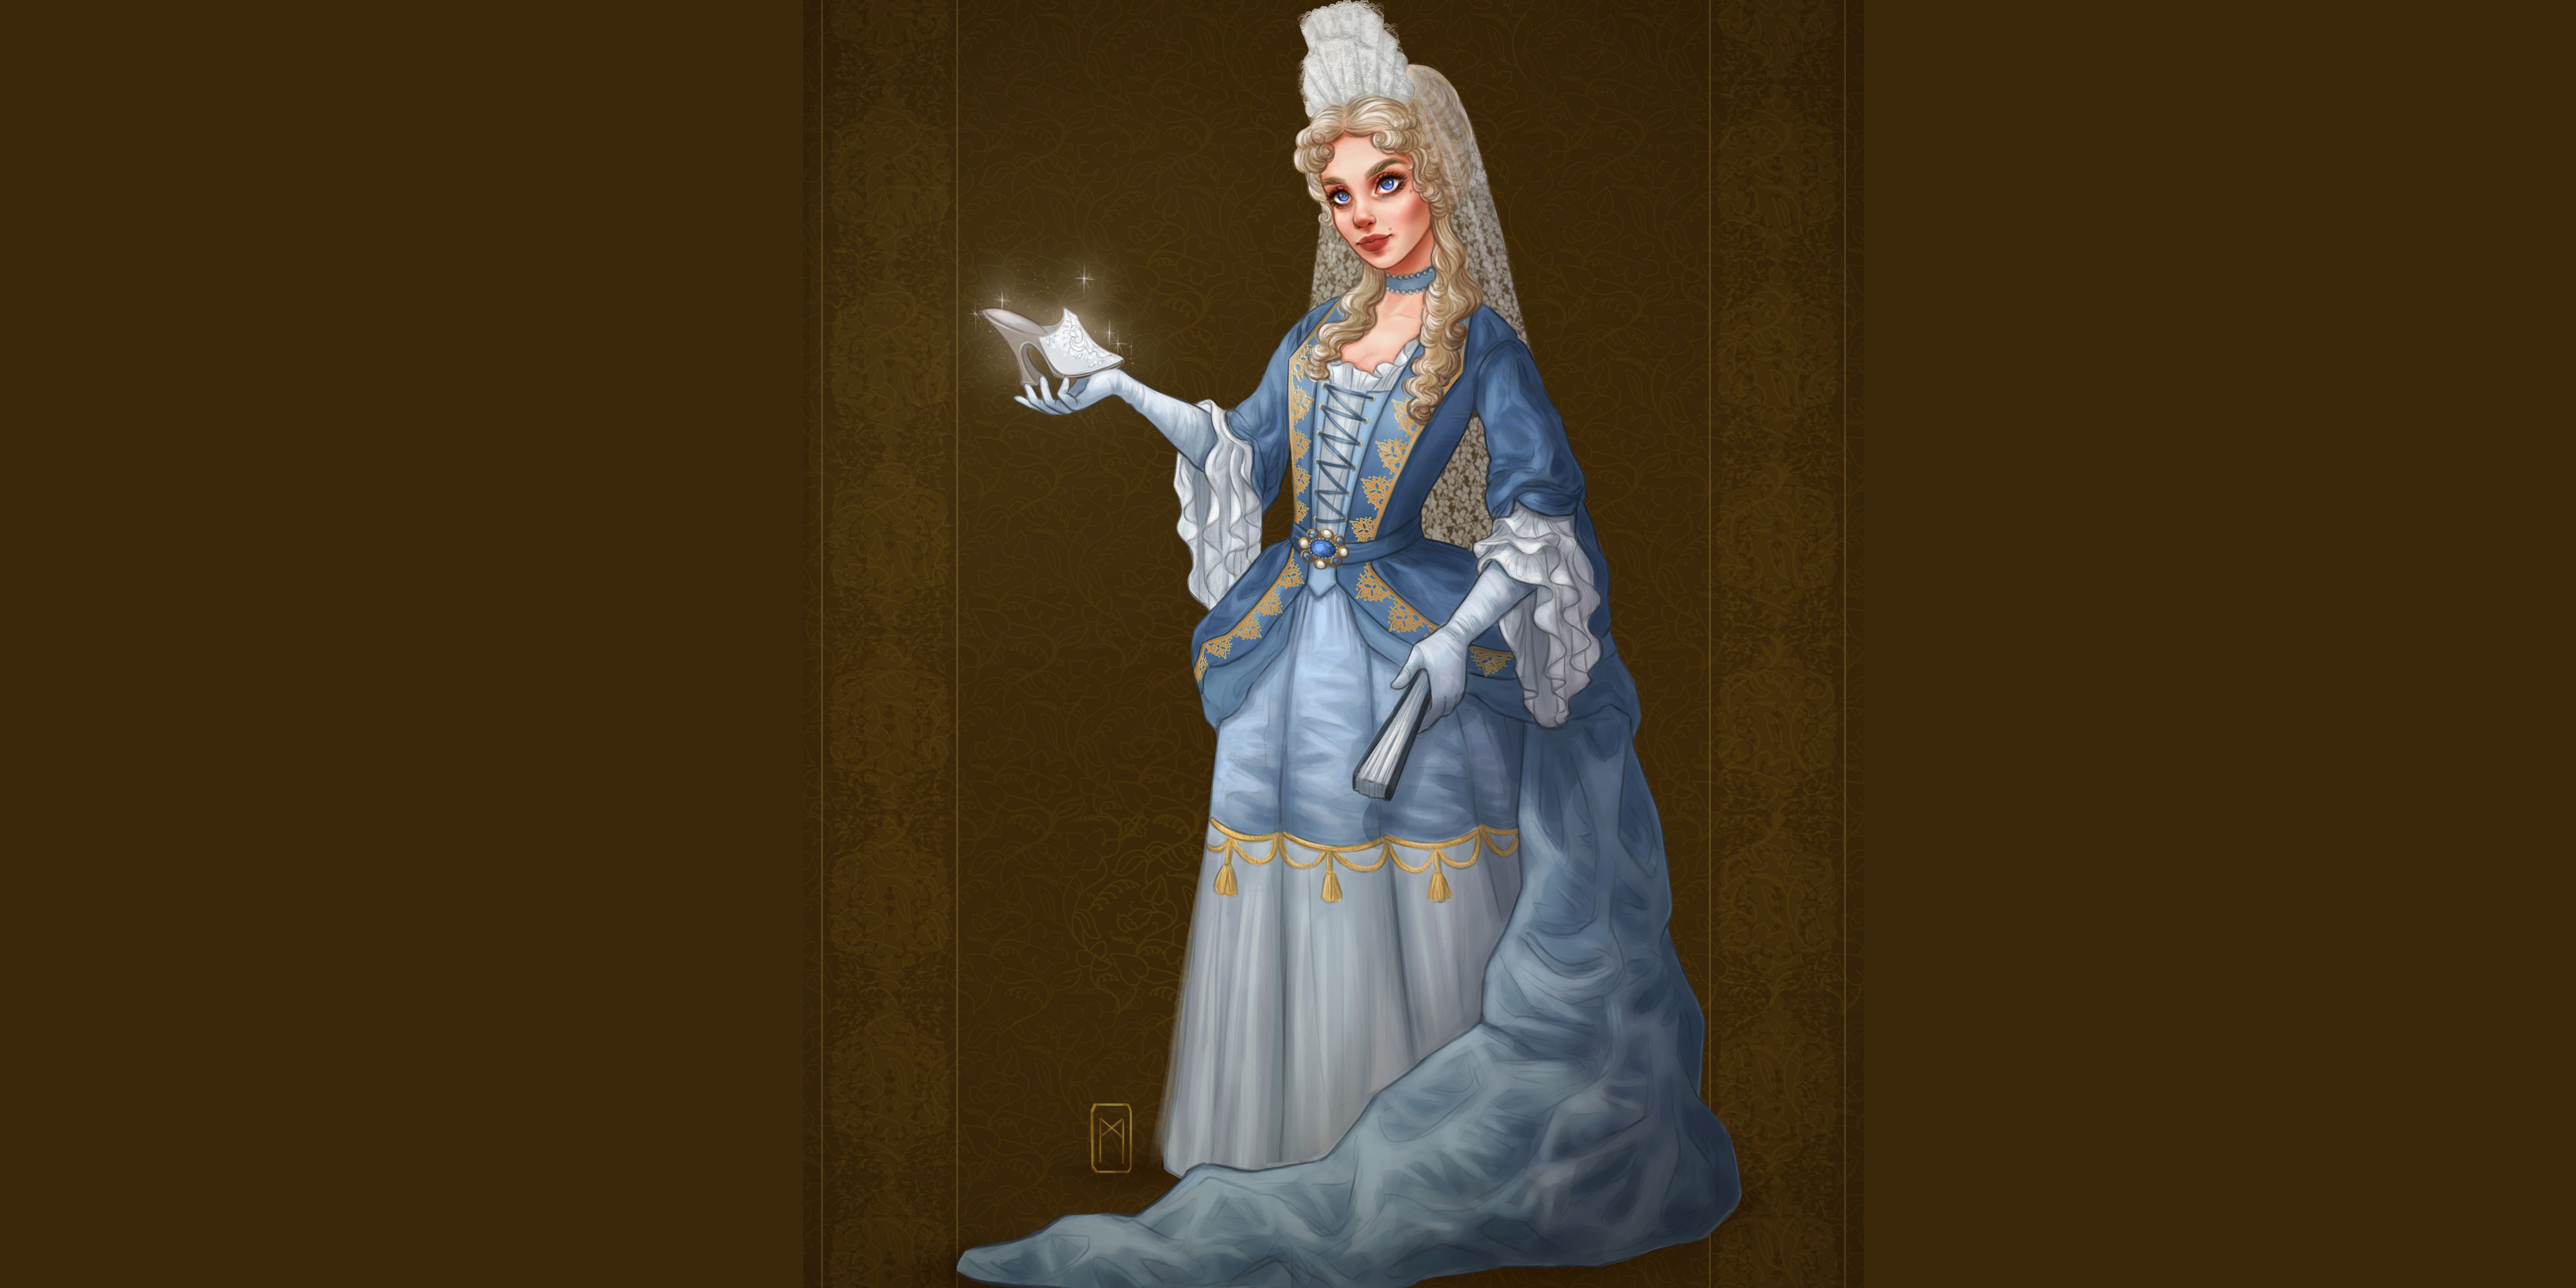 10 Drawings Of Historically Accurate Disney Princesses